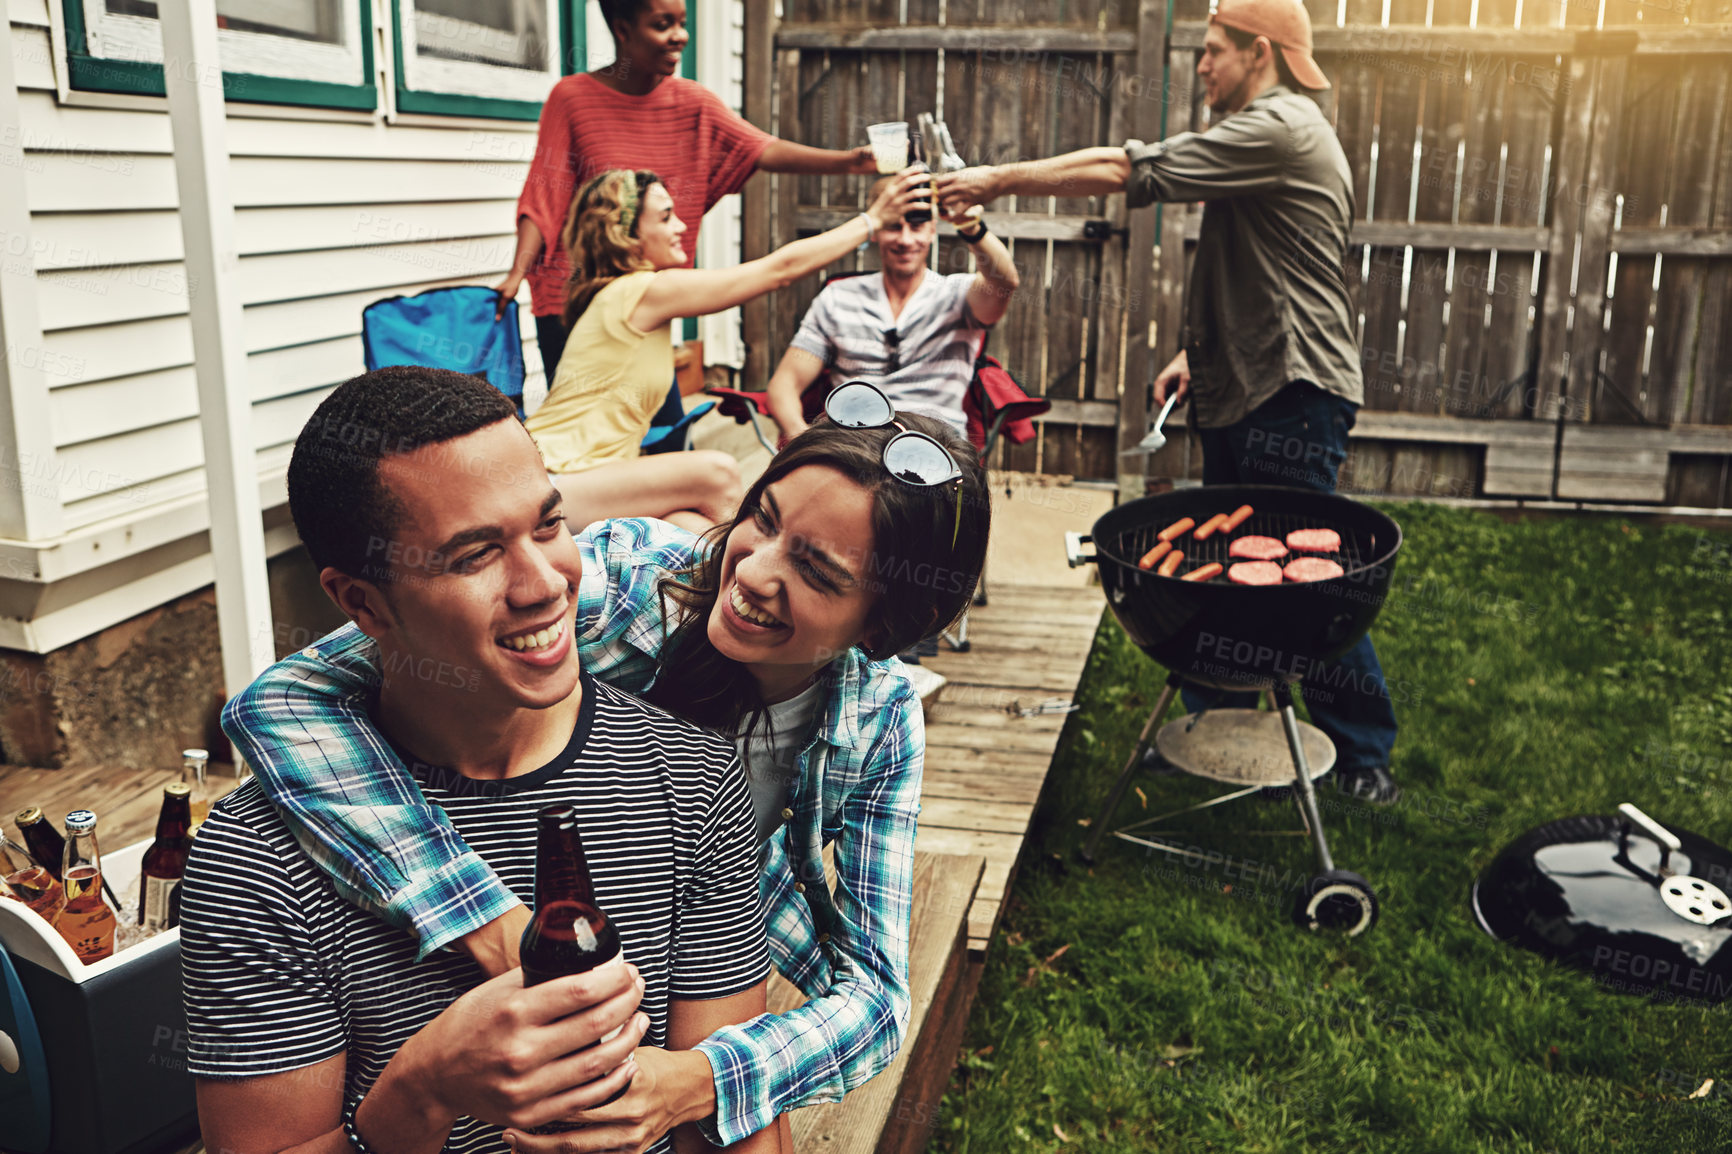 Buy stock photo Shot of a young couple enjoying a party with friends outdoors